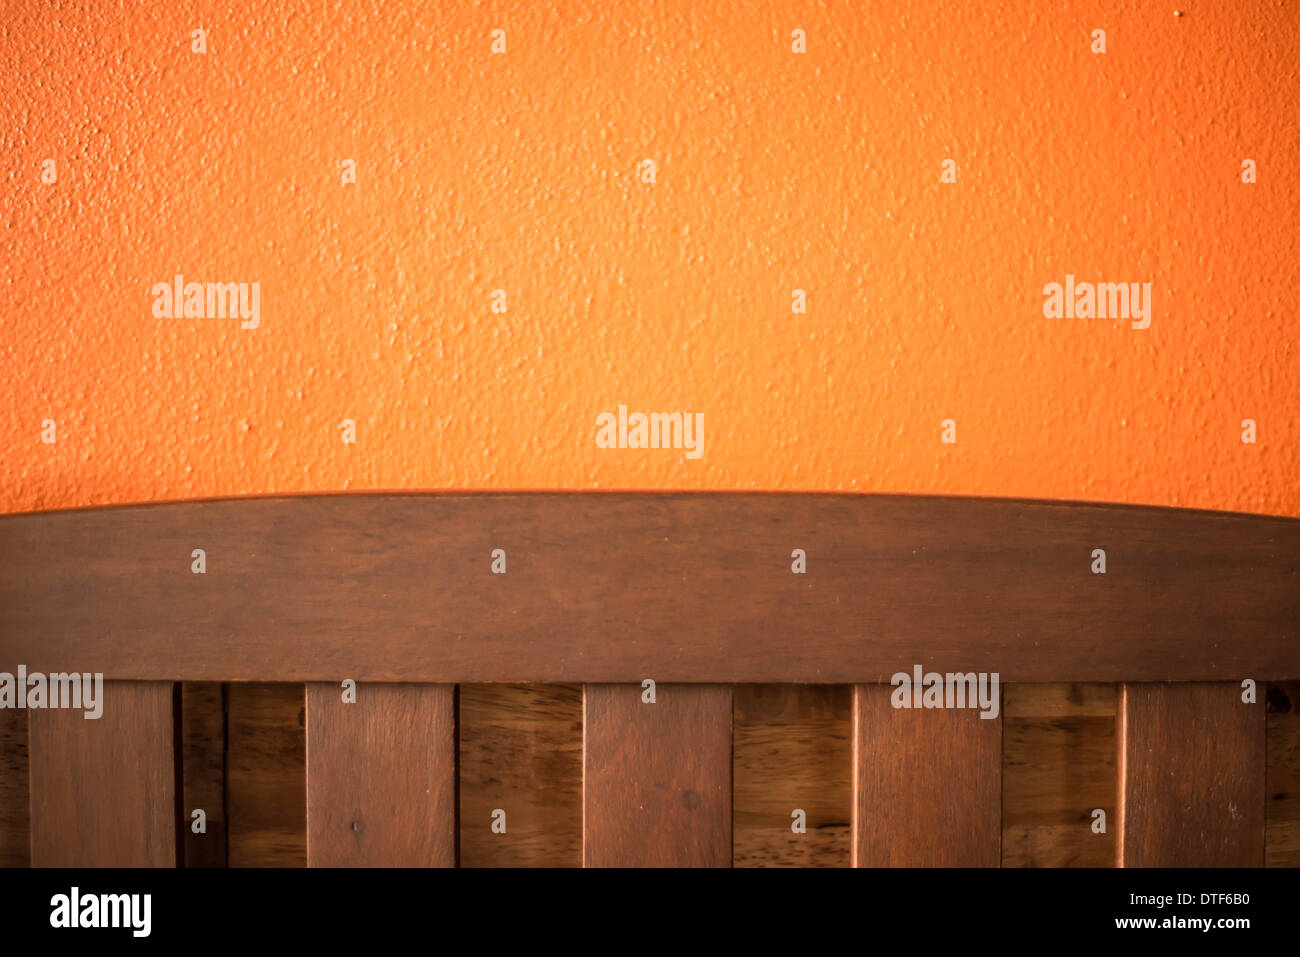 Backrest chair on the orange background in café. Stock Photo